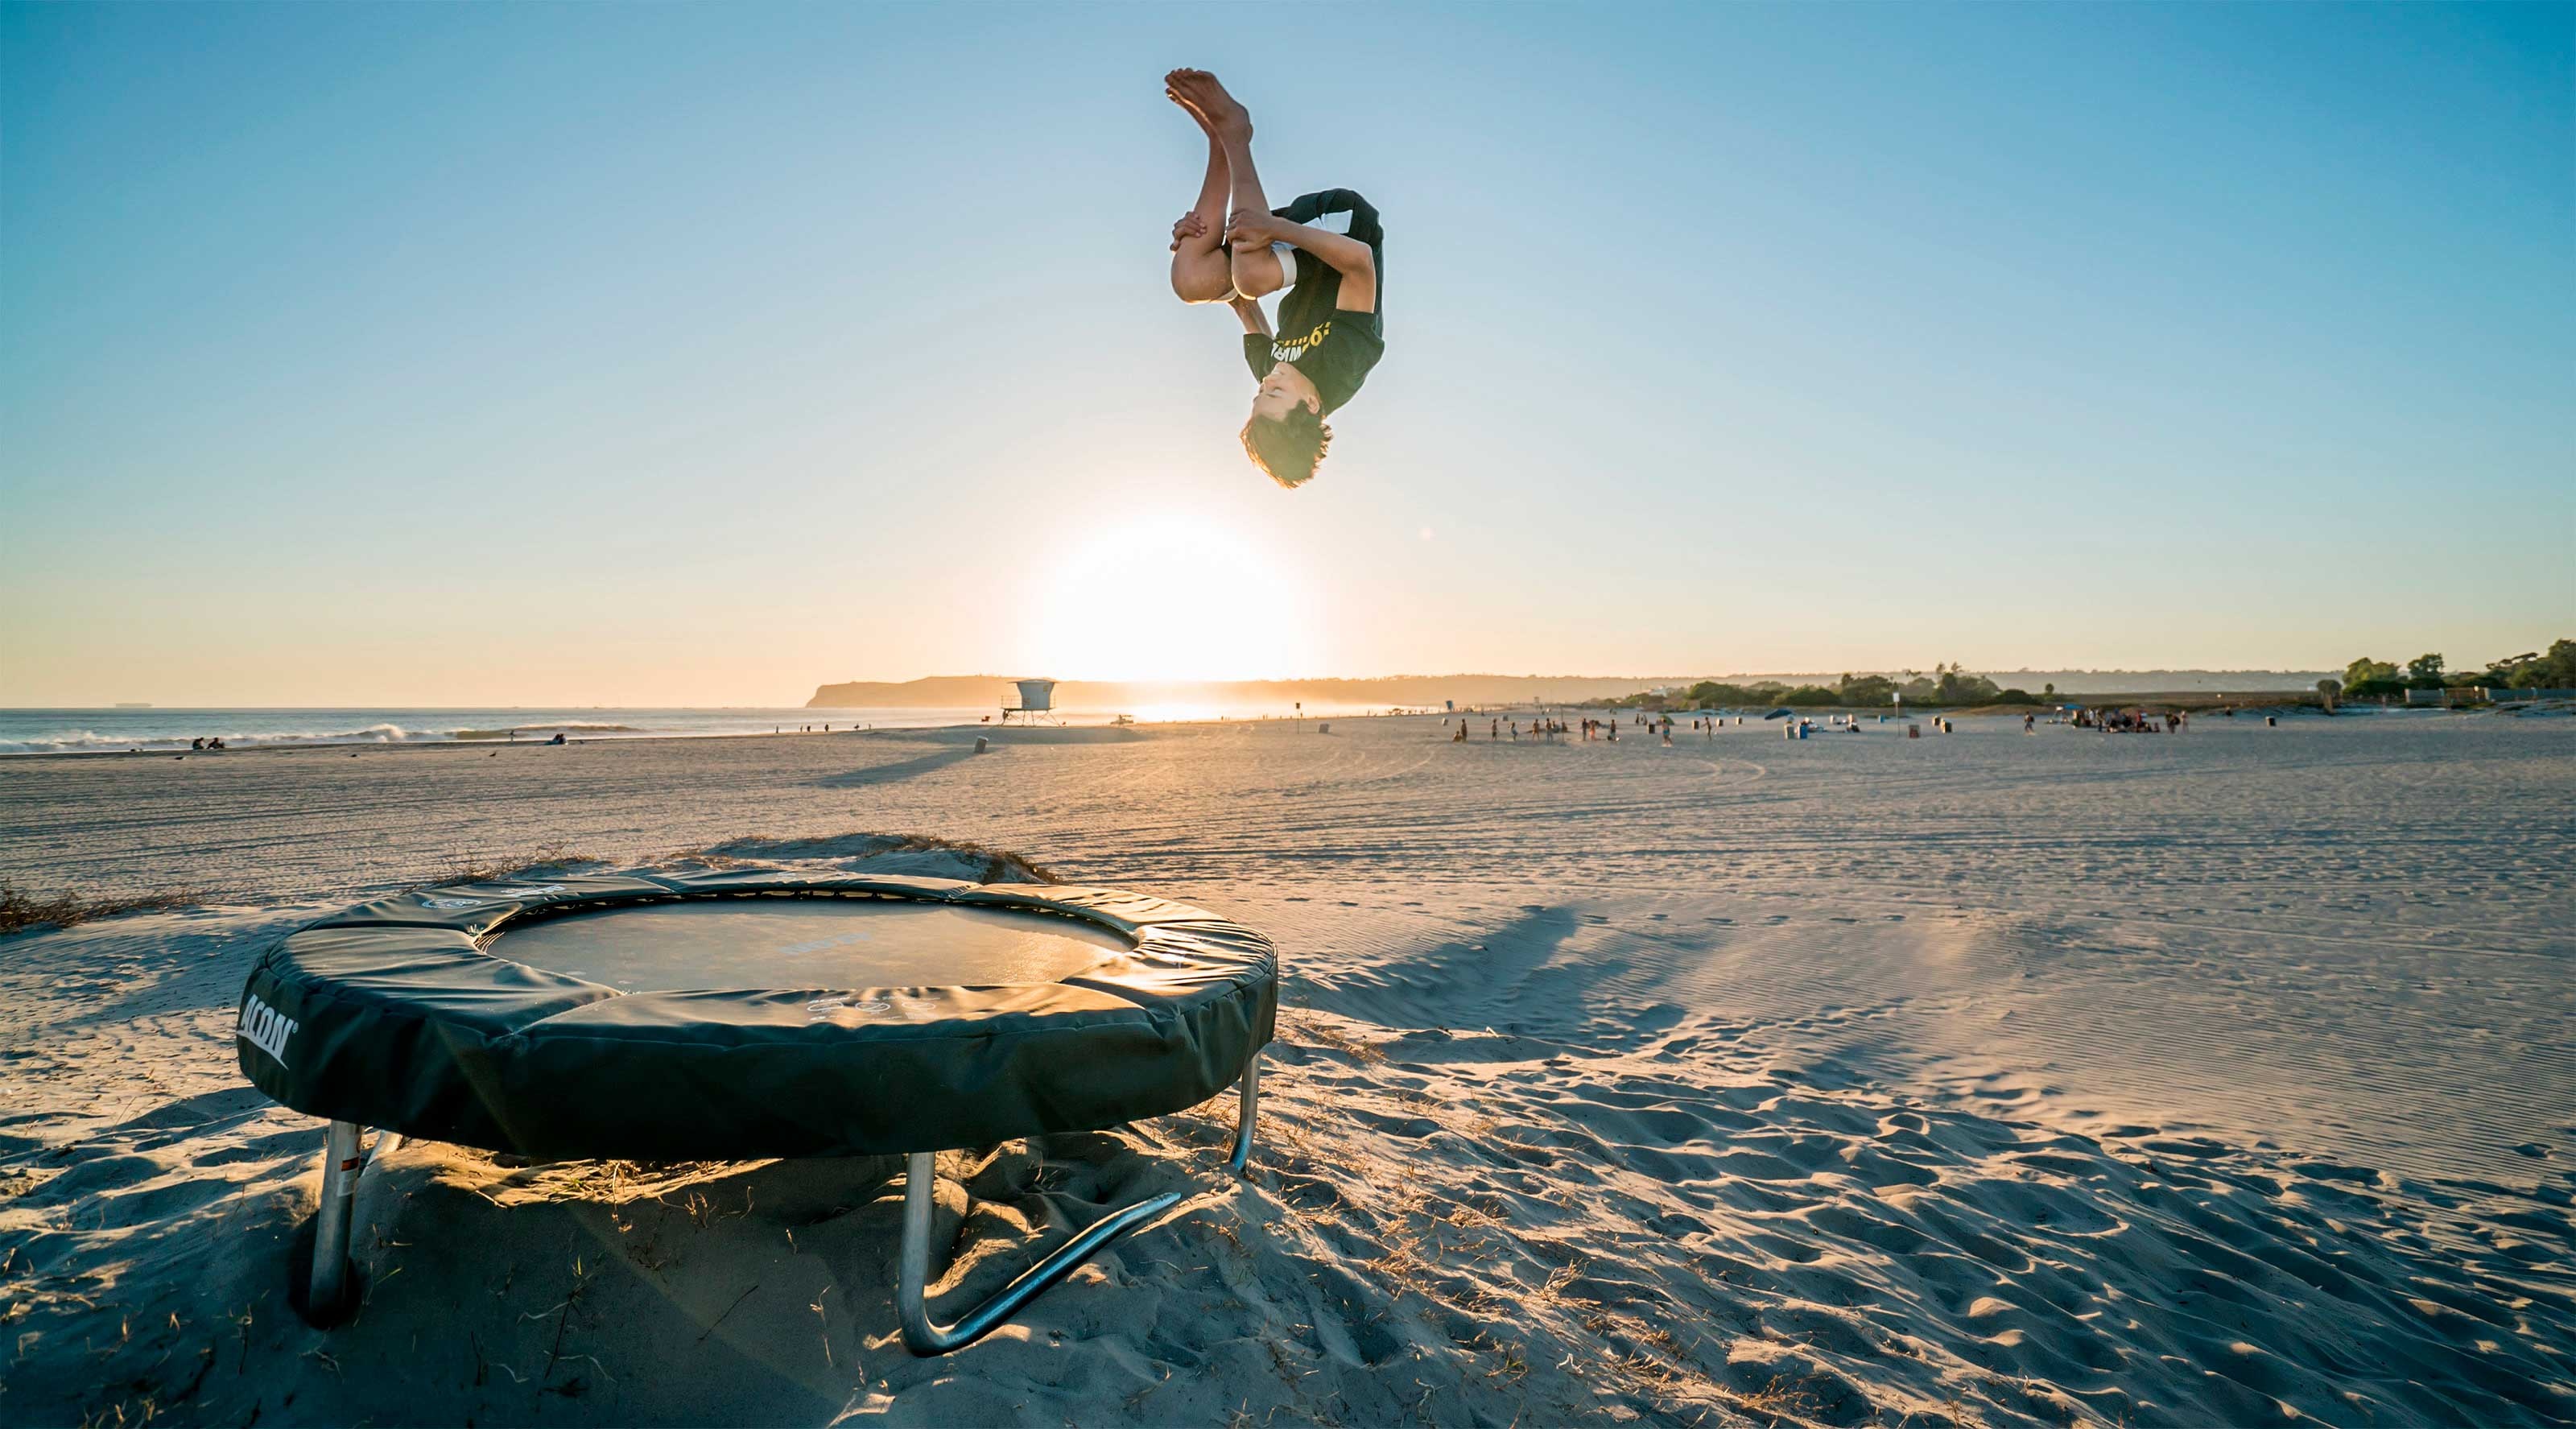 Trampolining: Recreational acrobatic activity at the beach, Forward-flip trick performed by an expert. 3200x1780 HD Background.